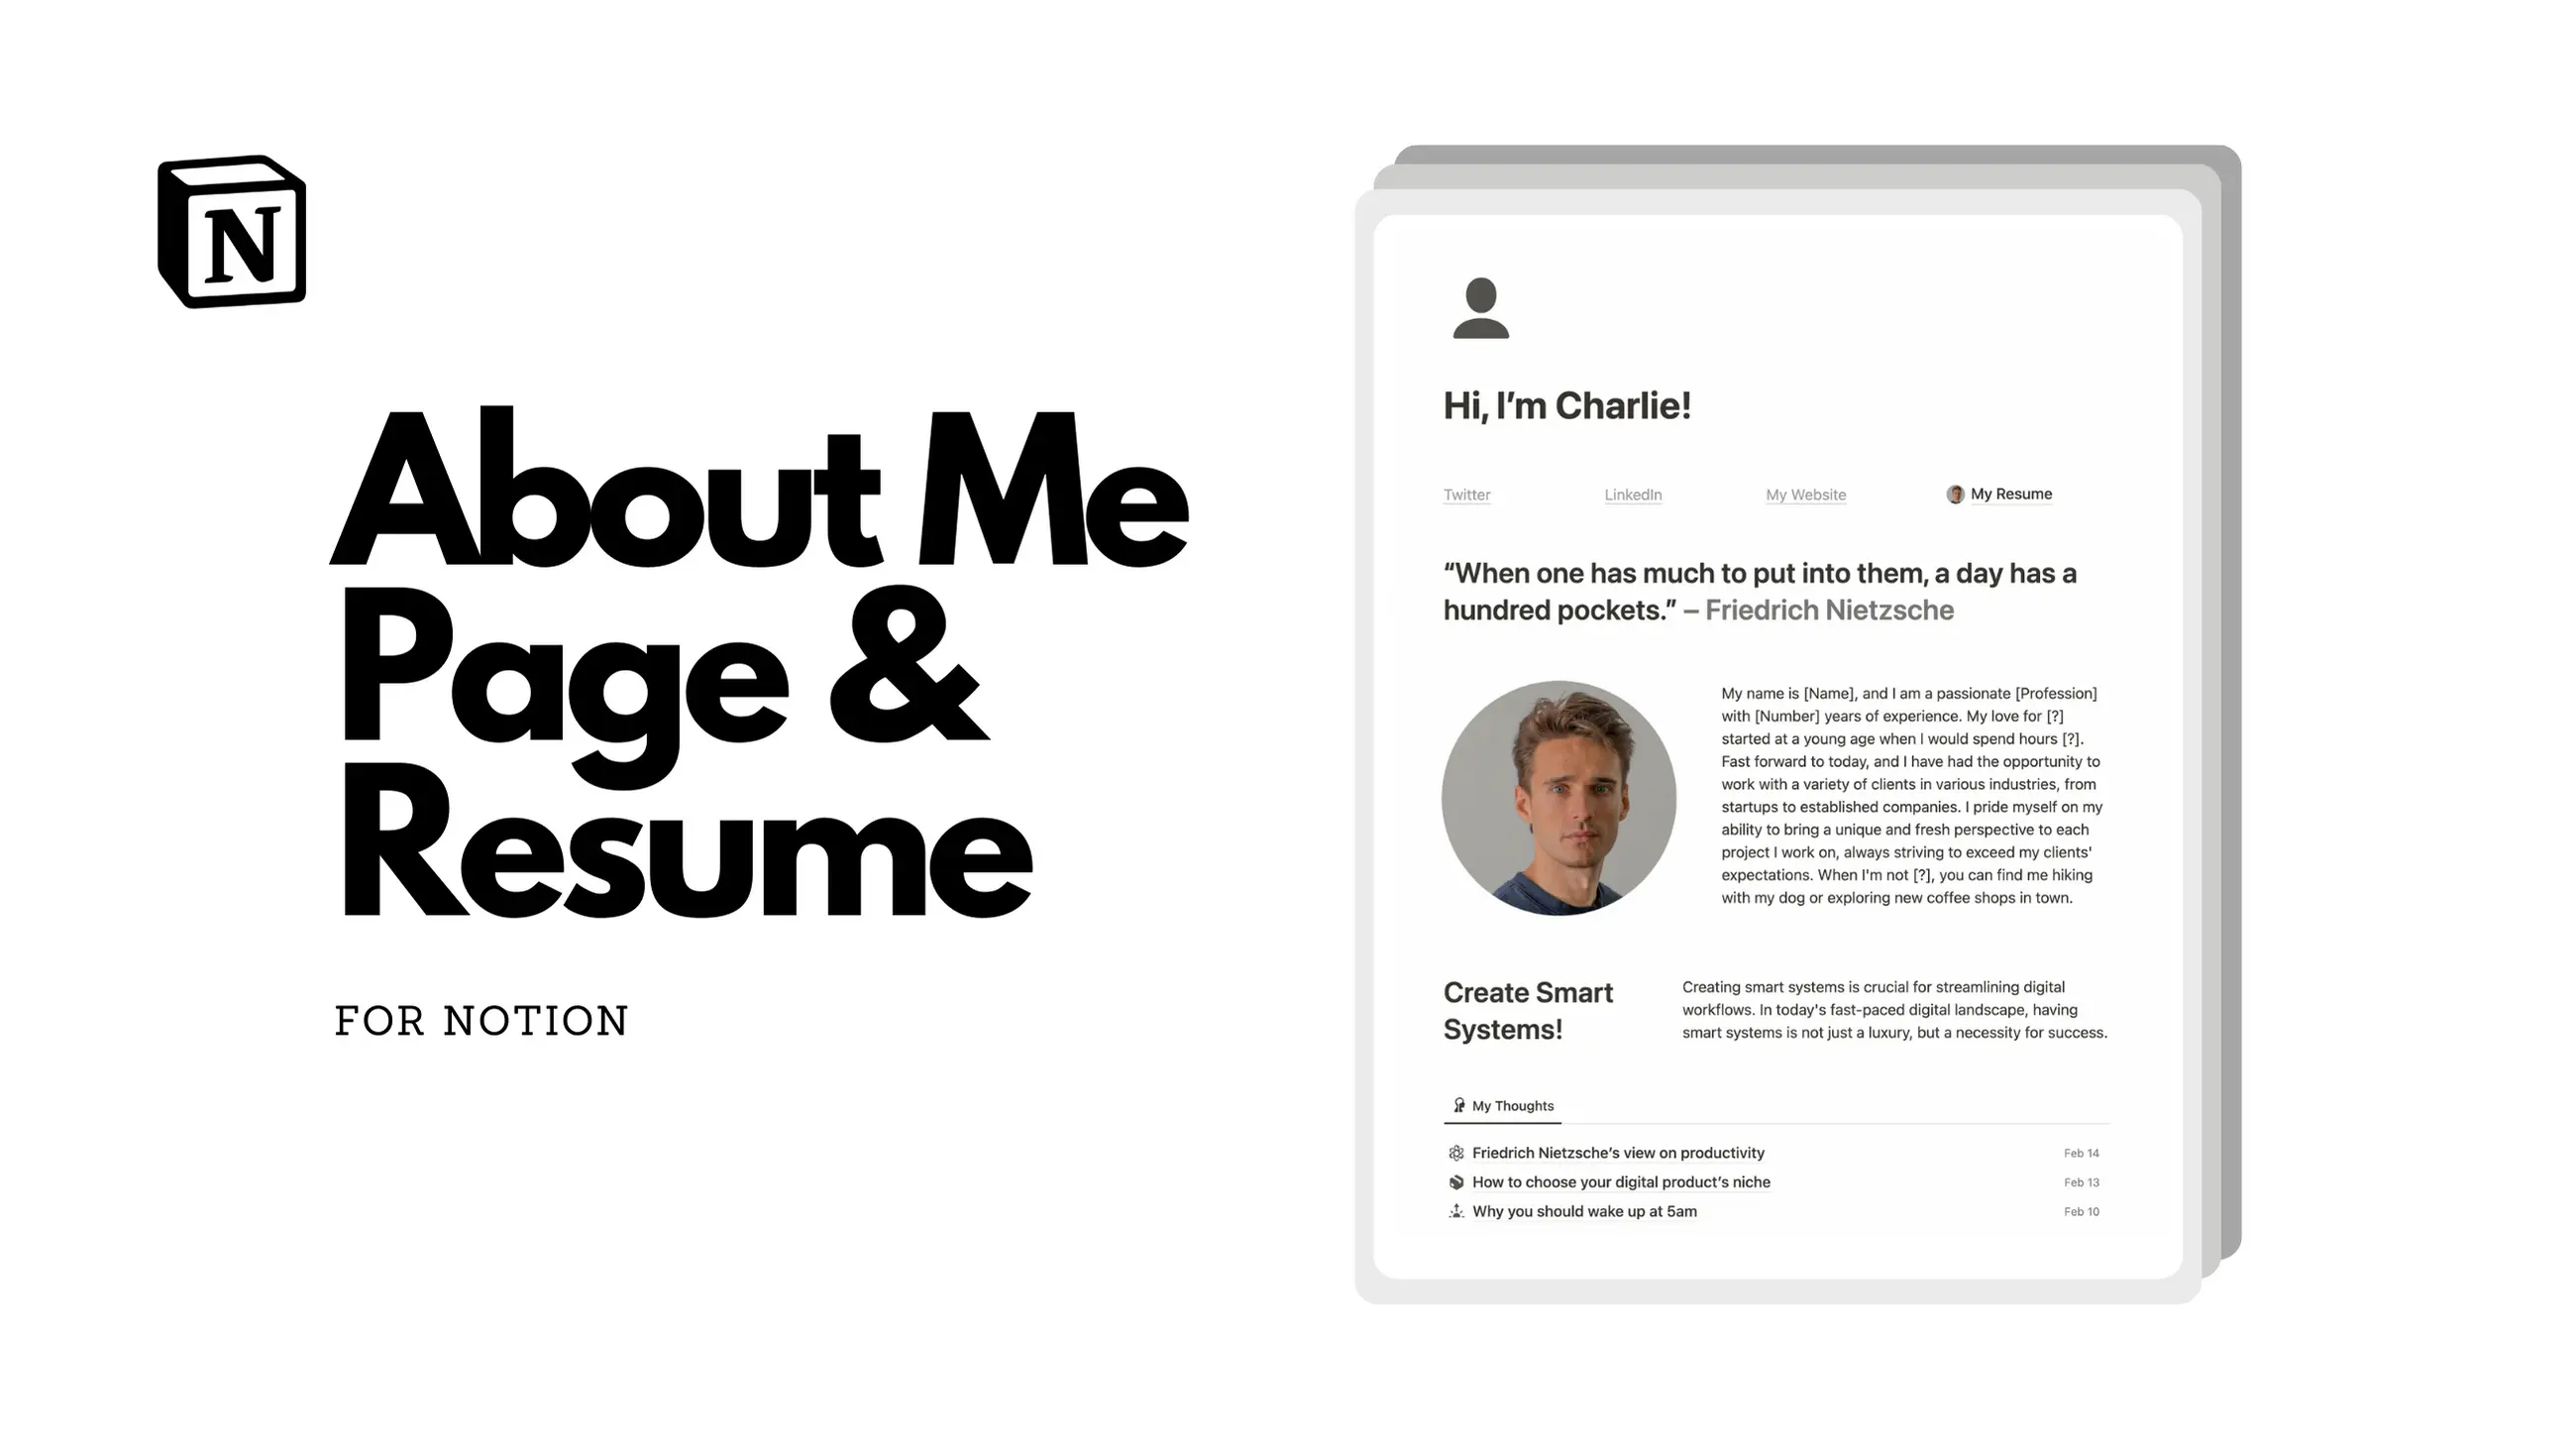 About Me Page & Resume for Notion image